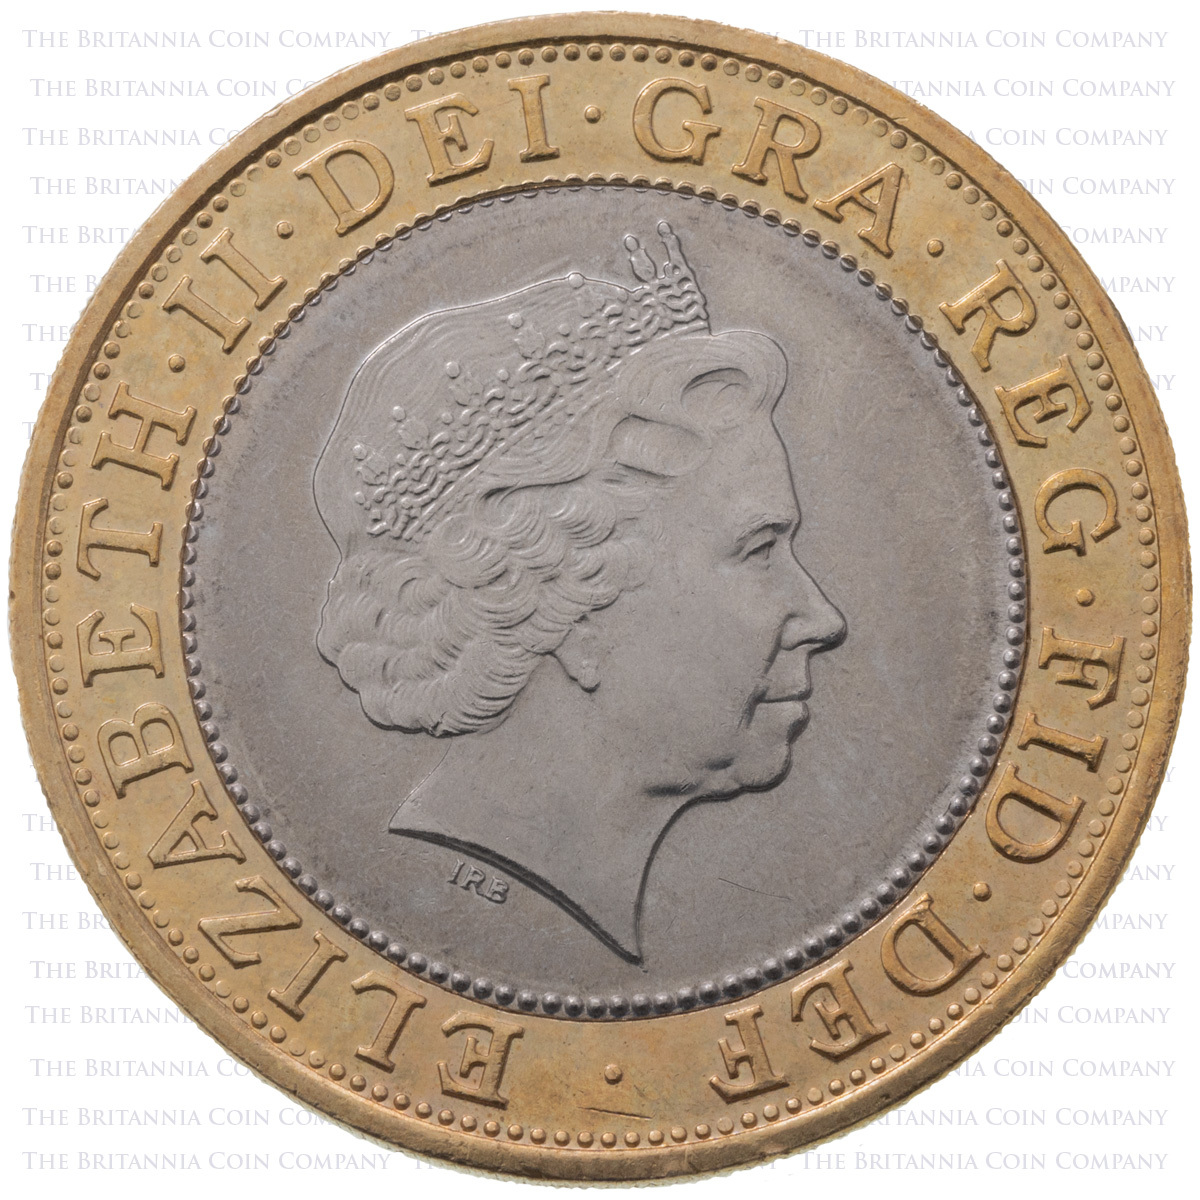 northern ireland coins - Collectible Coins and Medals, Buy and Sell with zero fees | Preloved